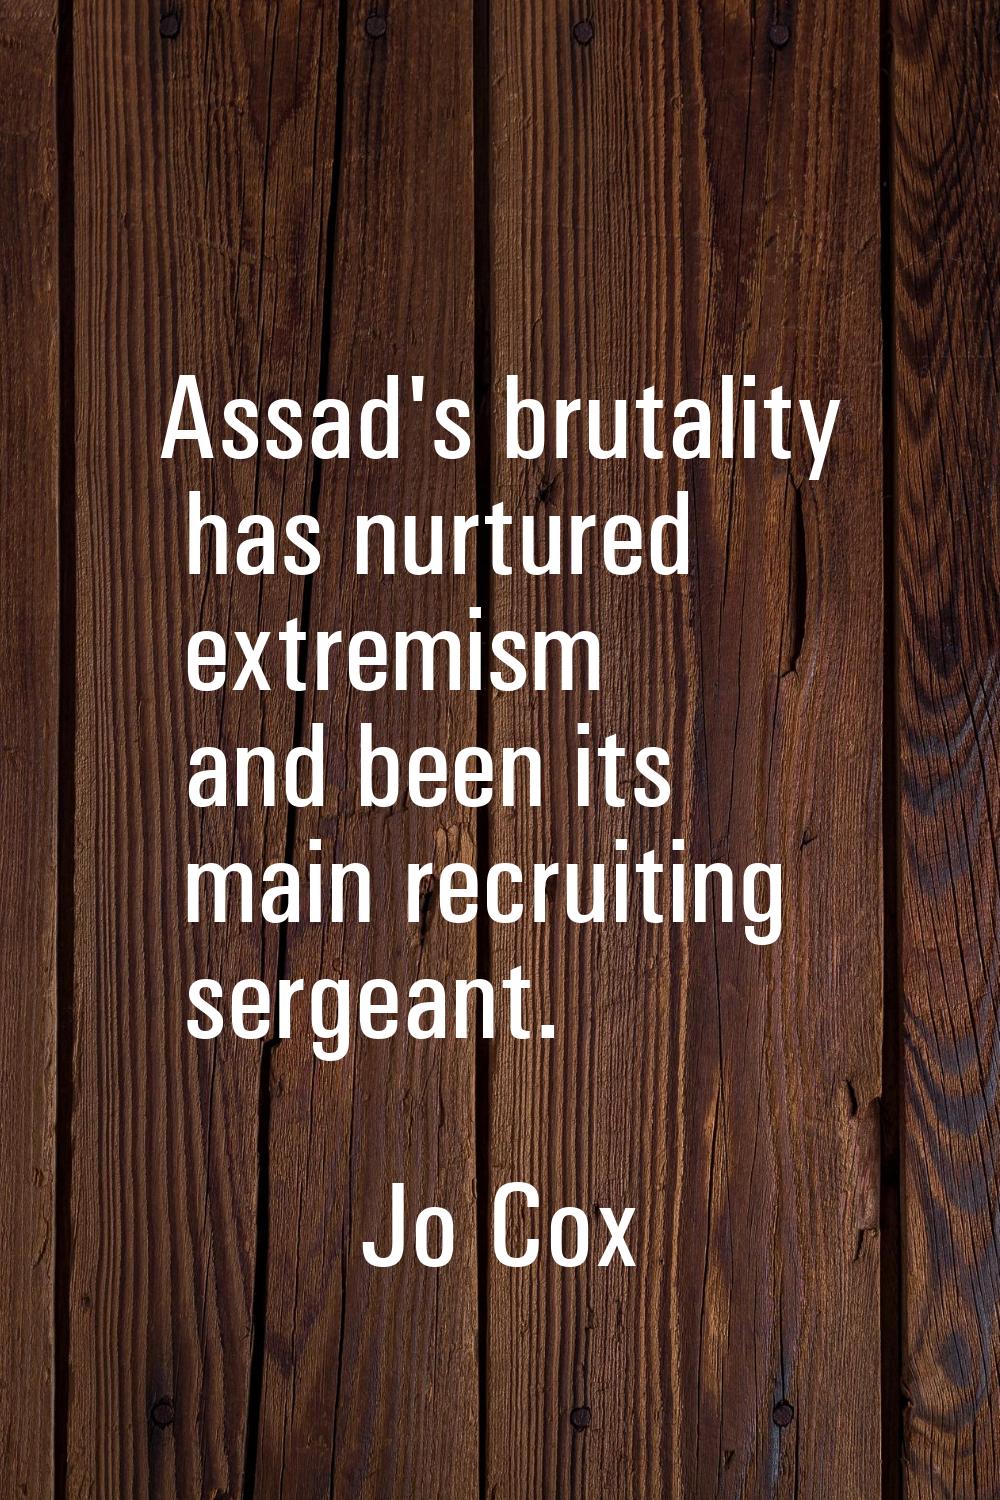 Assad's brutality has nurtured extremism and been its main recruiting sergeant.